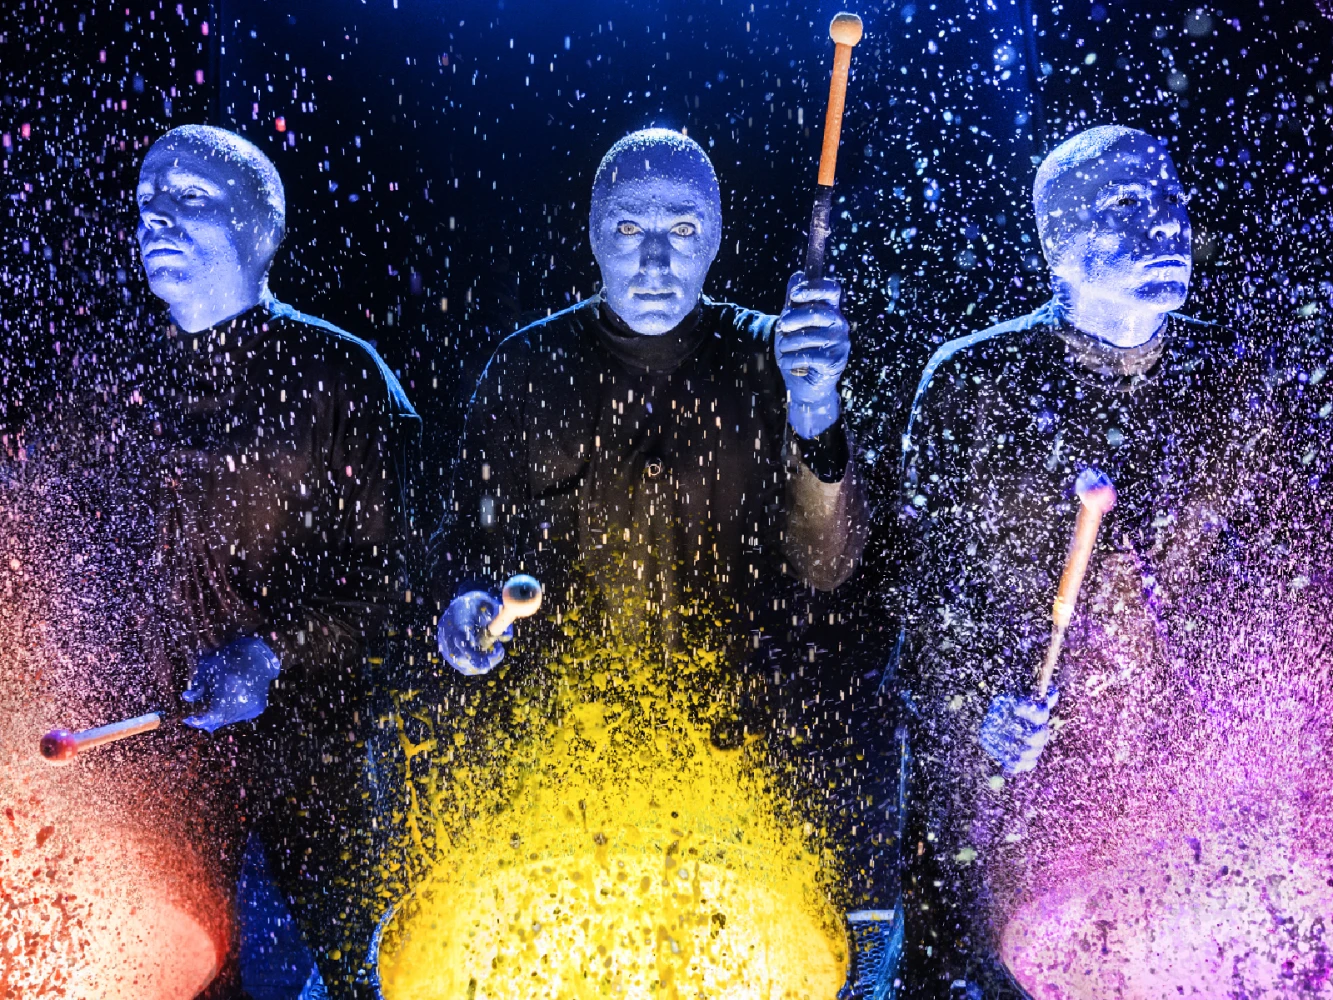 Blue Man Group: What to expect - 4